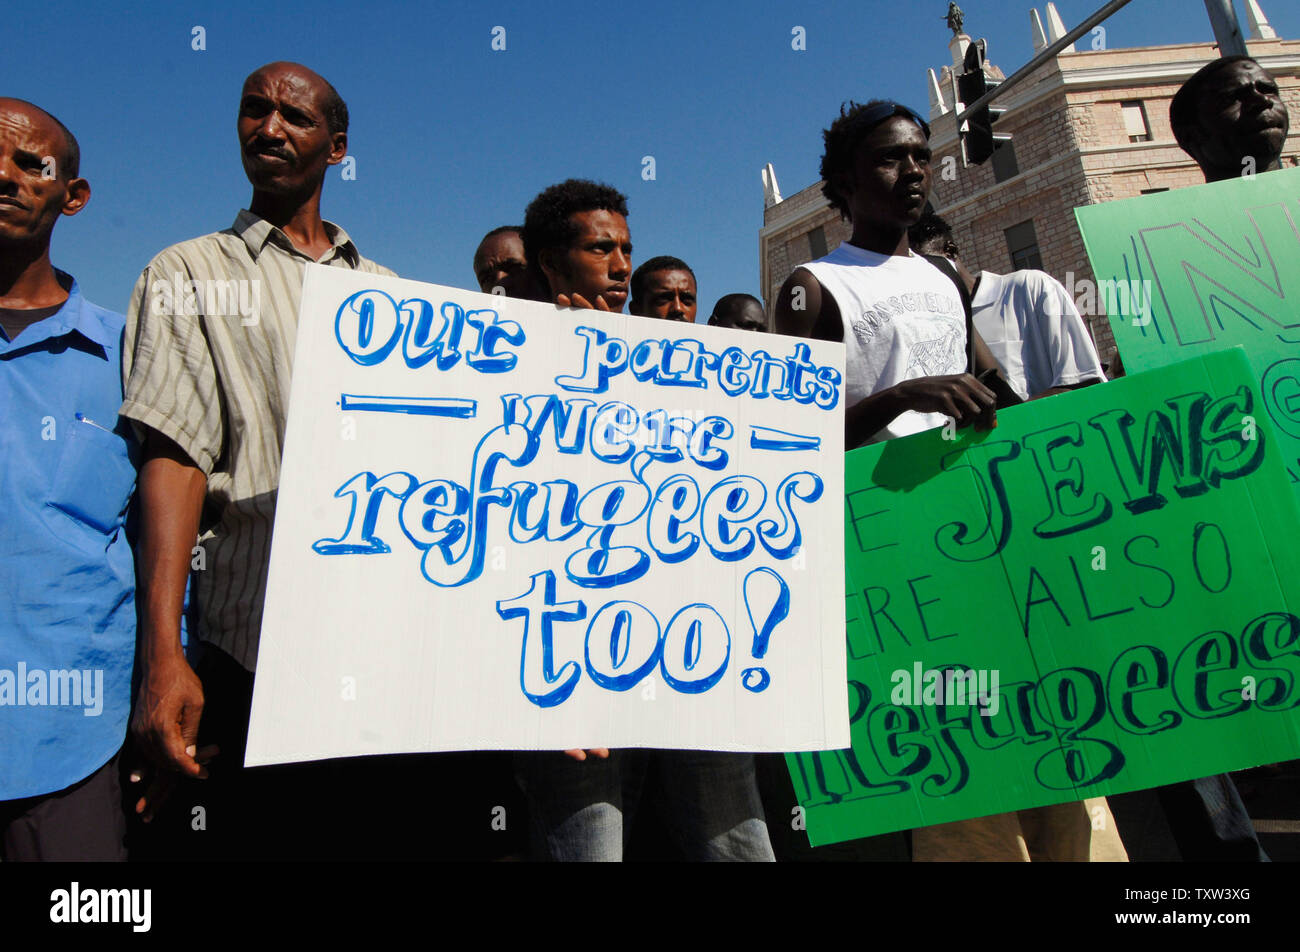 Sudanese refugees demonstrate against their possible deportation to Egypt in front of Israeli Prime Minister Ehud Olmert's residence in Jerusalem, August 22, 2007. Israel deported on Saturday 50 Sudanese refugees, who came from the war torn Darfur region, but said it would allow 500 still in the country to remain.  (UPI Photo/Debbie Hill) Stock Photo